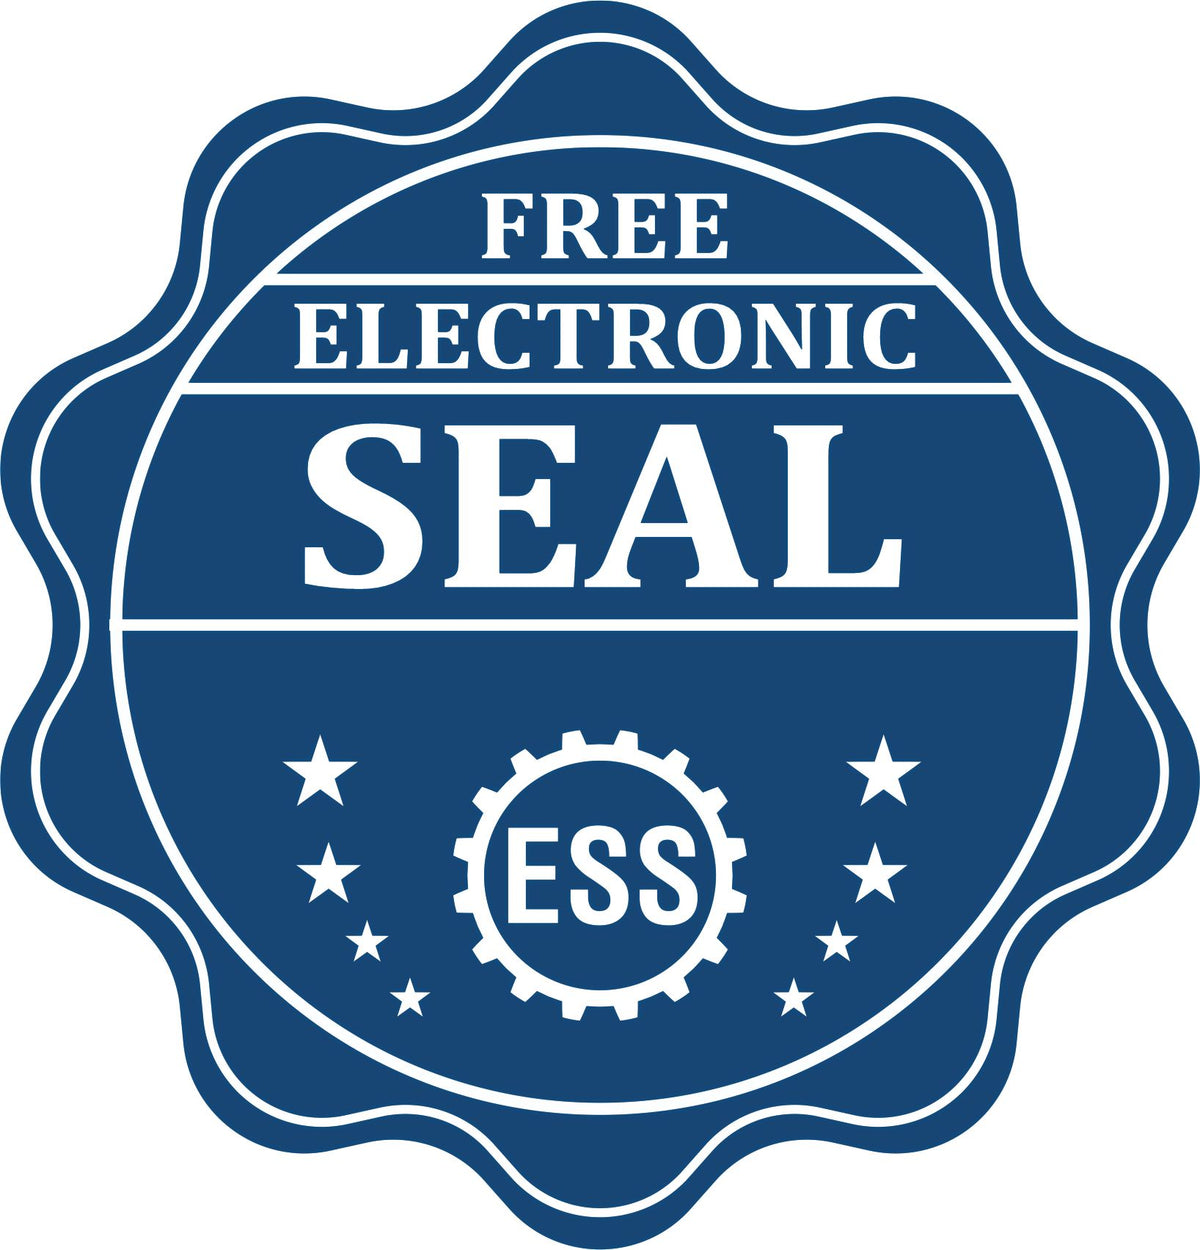 A badge showing a free electronic seal for the State of New Mexico Soft Land Surveyor Embossing Seal with stars and the ESS gear on the emblem.